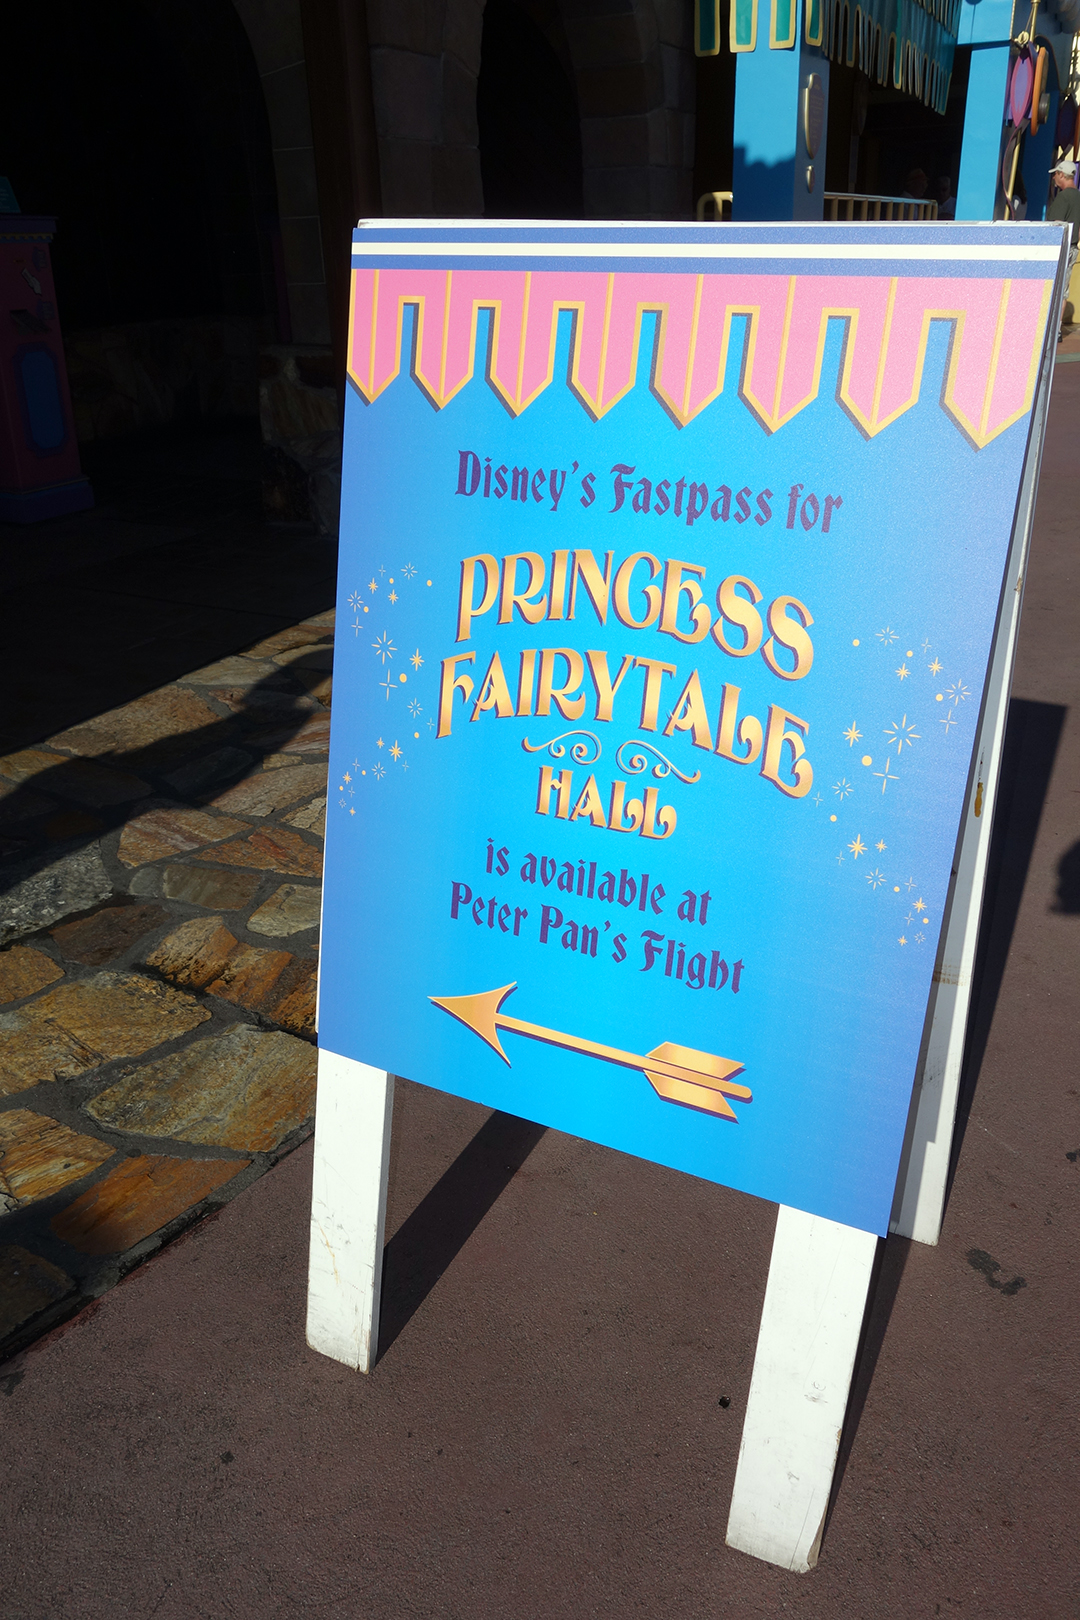 Once you get to the Peter Pan's Flight Fastpass distribution area, you'll see another handy sign pointing at the machines